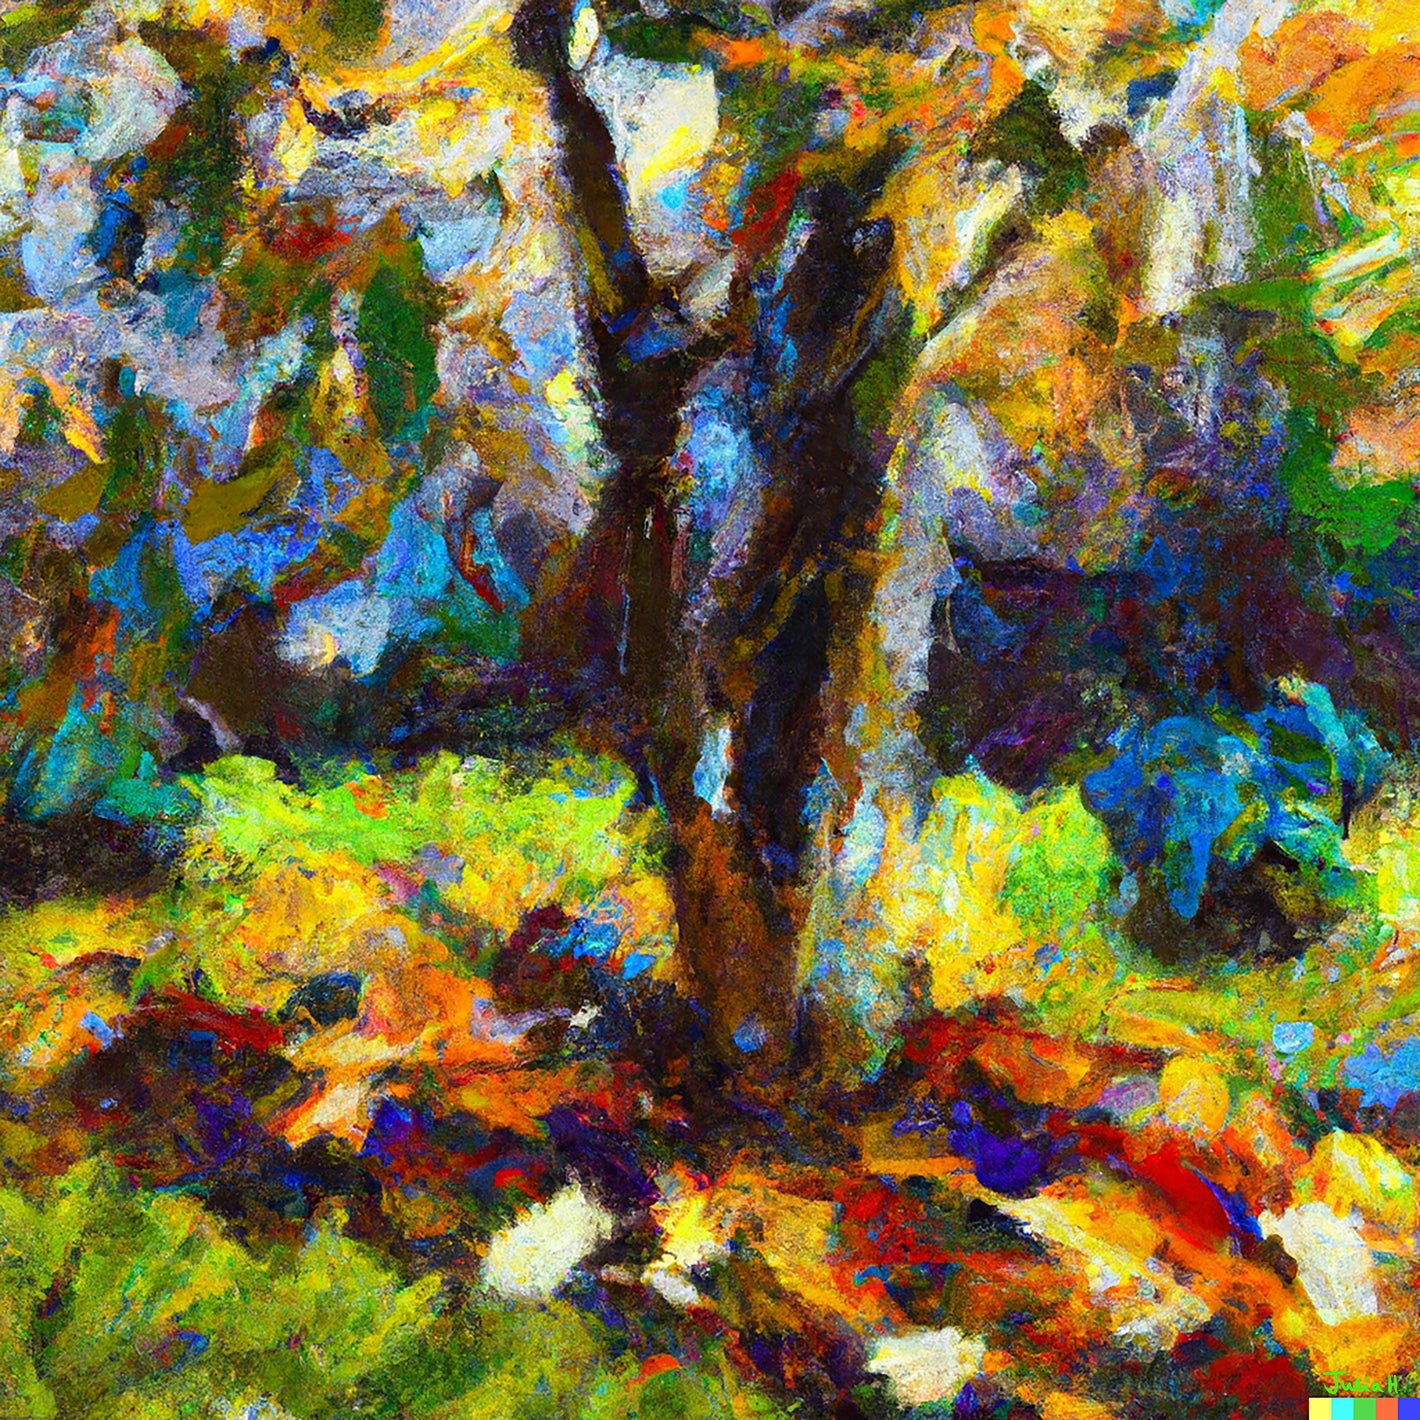 An impressionist style AI-generated digital artwork by Julia Hargreaves and DALL-E, ‘Fallen Leaves’ depicts a multi-trunk tree shedding vibrant colourful leaves.  The tree stands in a lush green grassy area blanketed with colourful fallen leaves, creating a captivating and symbolic artwork.